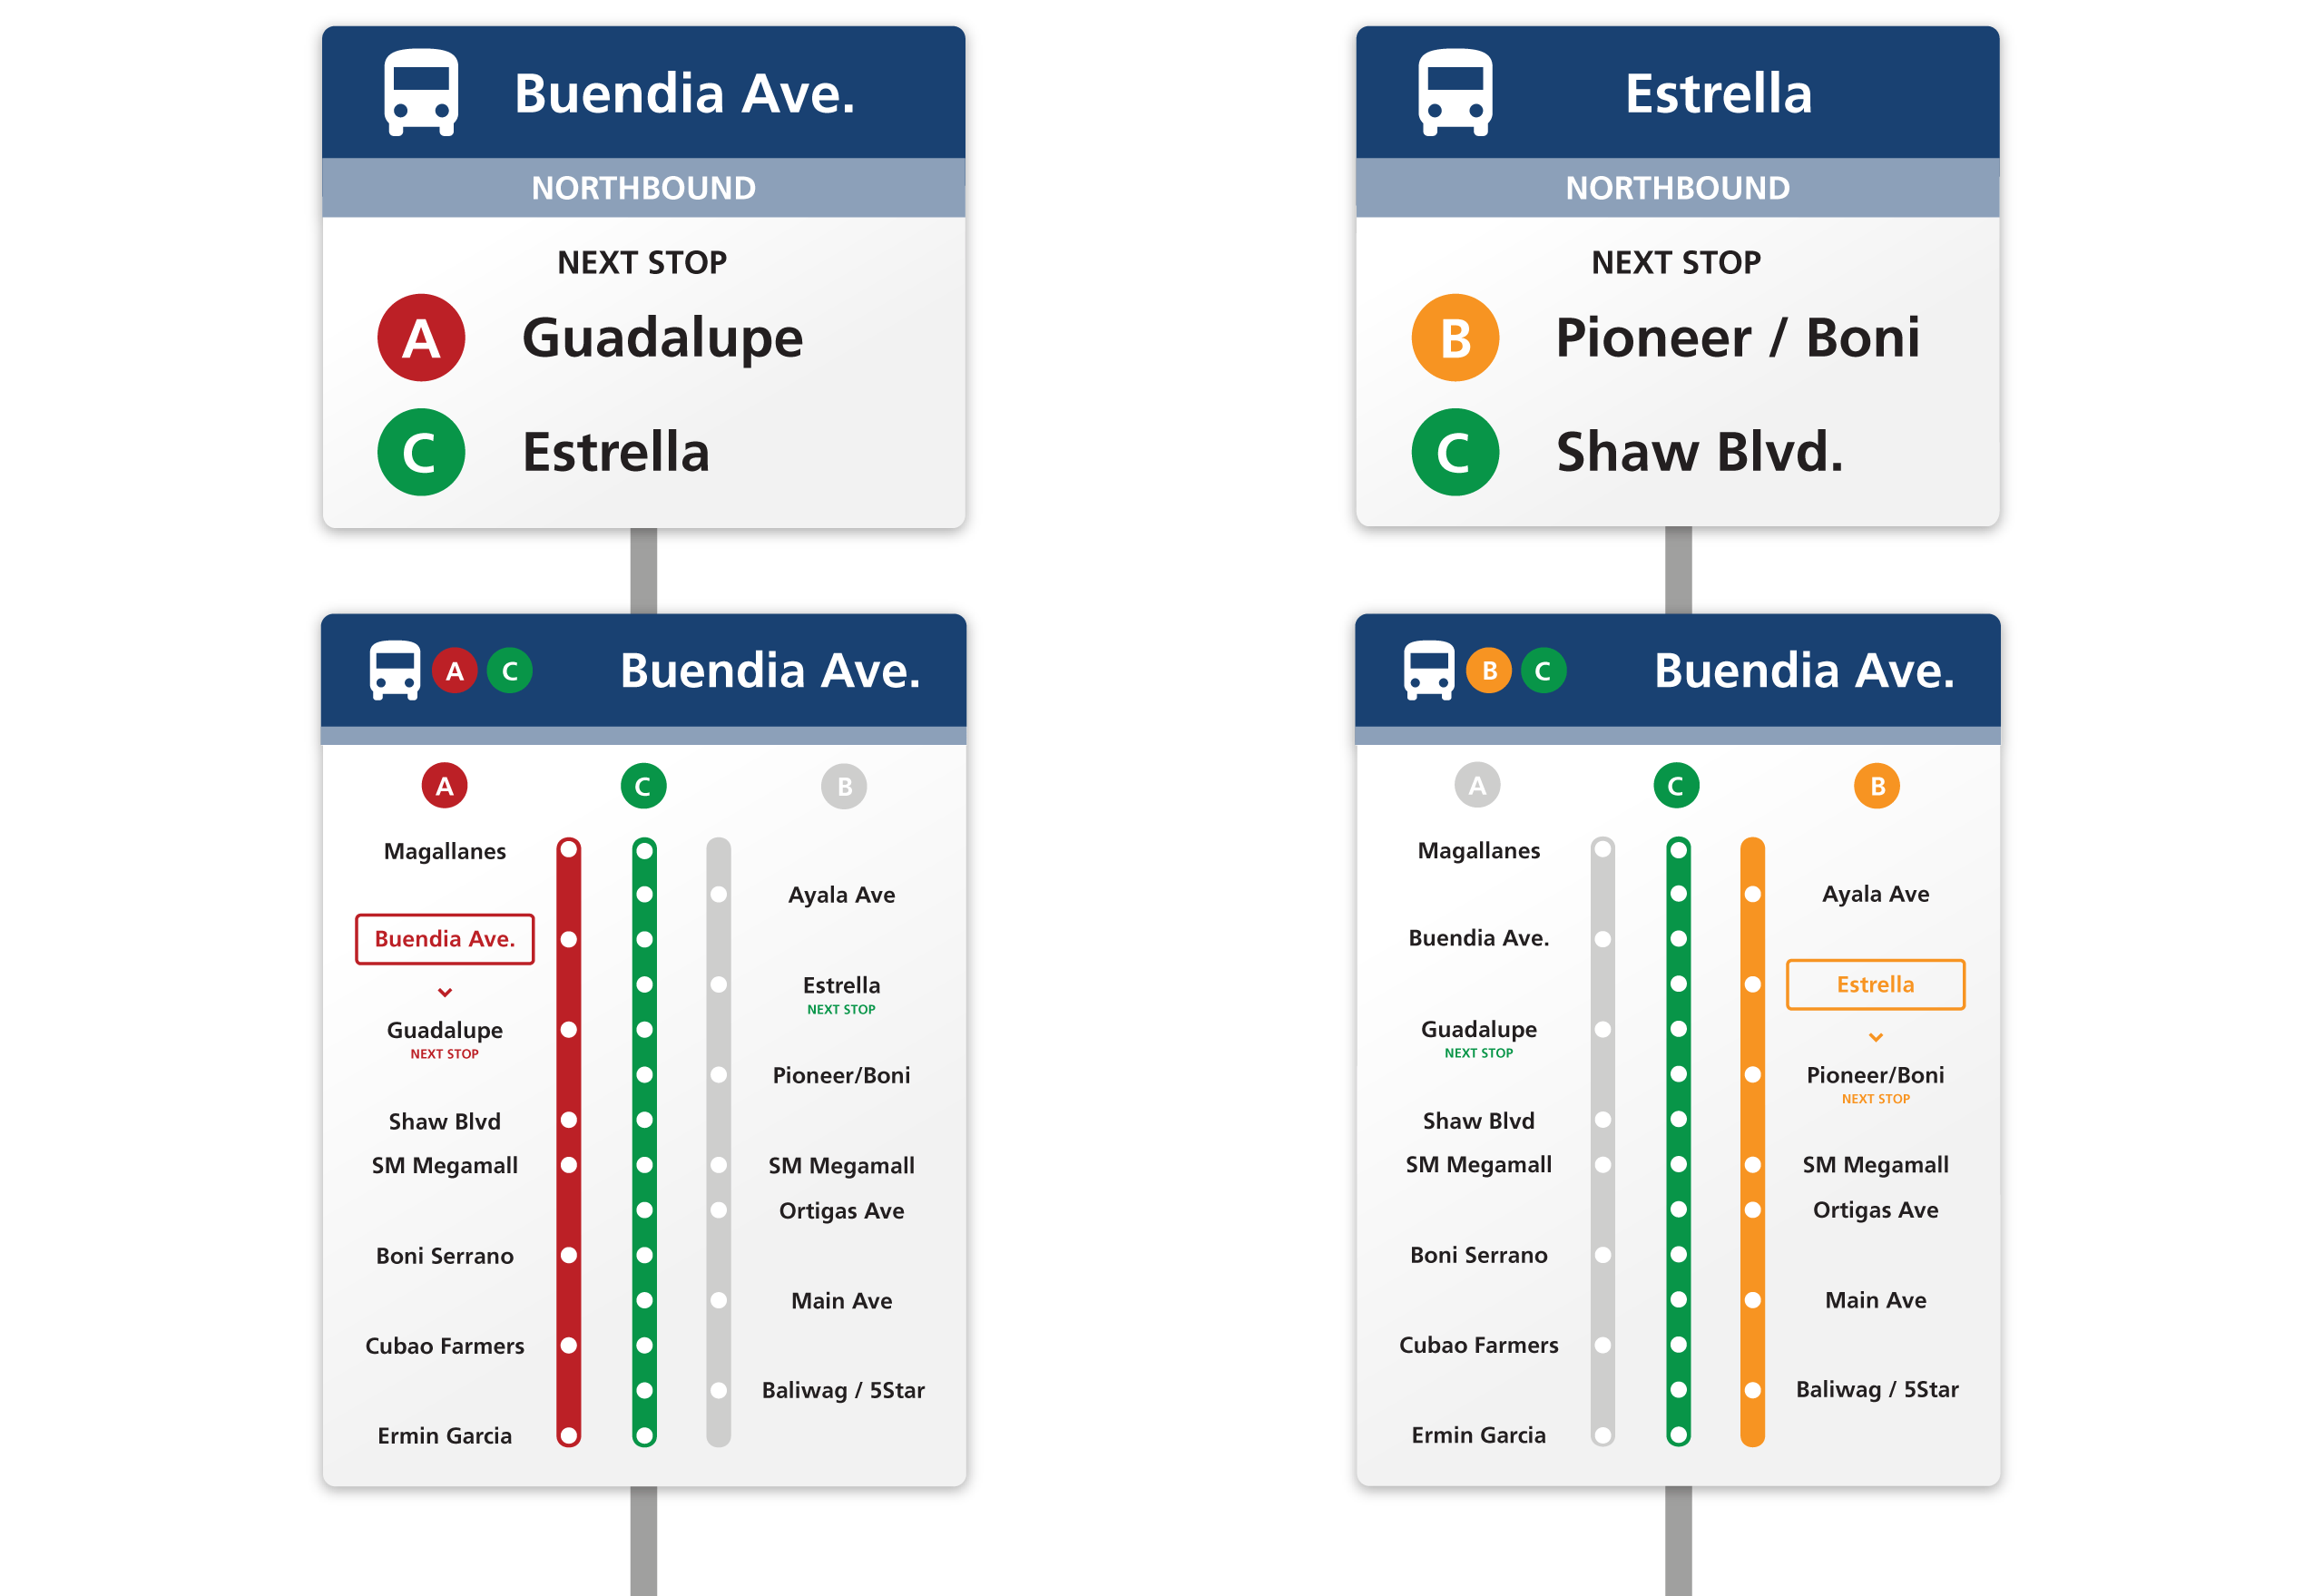 Route information and stop directory